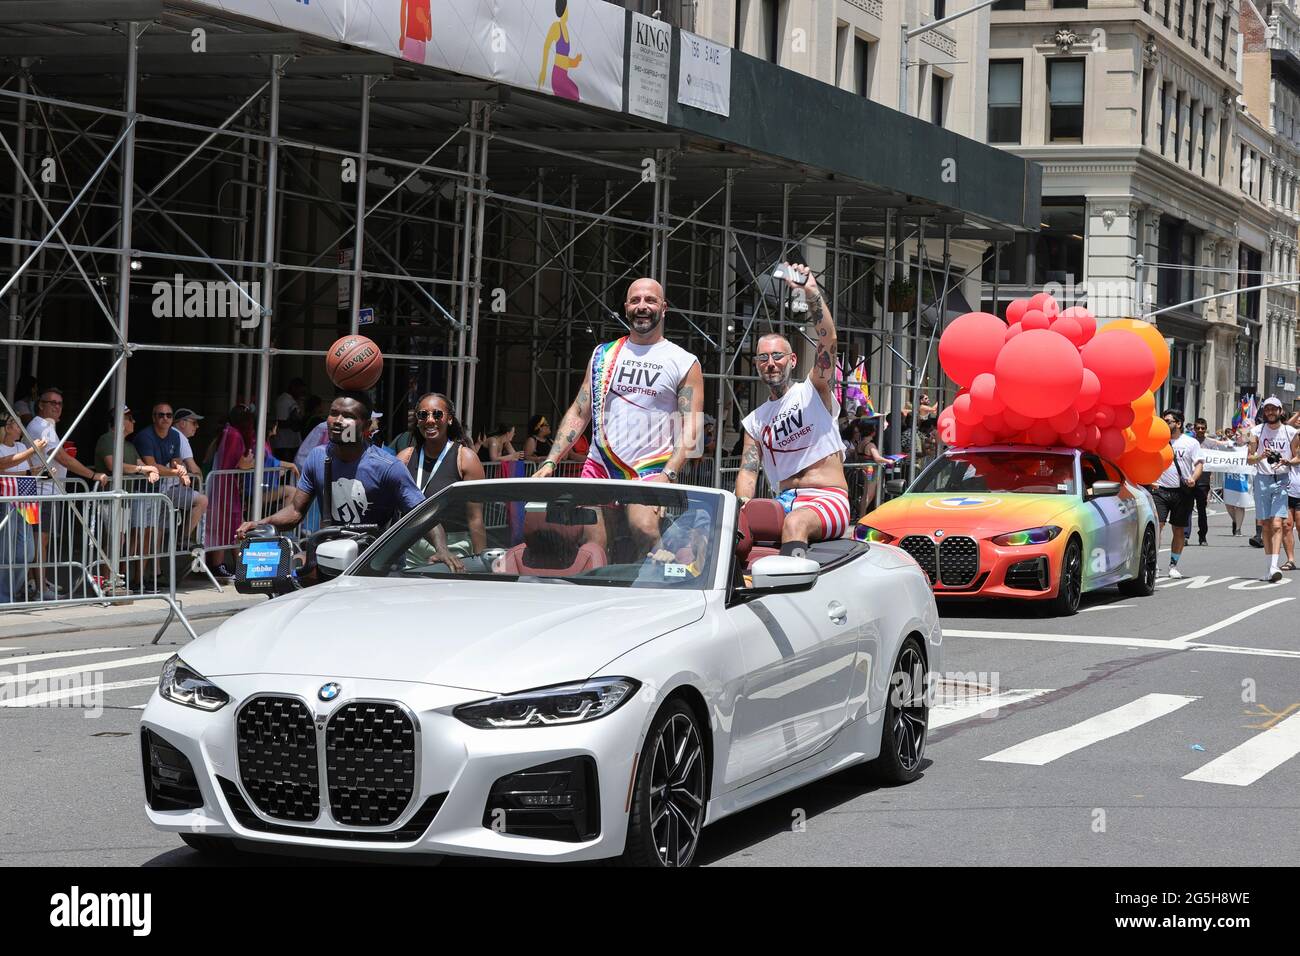 The Louis Vuitton store on Fifth Avenue in New York, seen on Sunday, June  21, 2020. decorated for the Gay Pride. (© Richard B. Levine Stock Photo -  Alamy